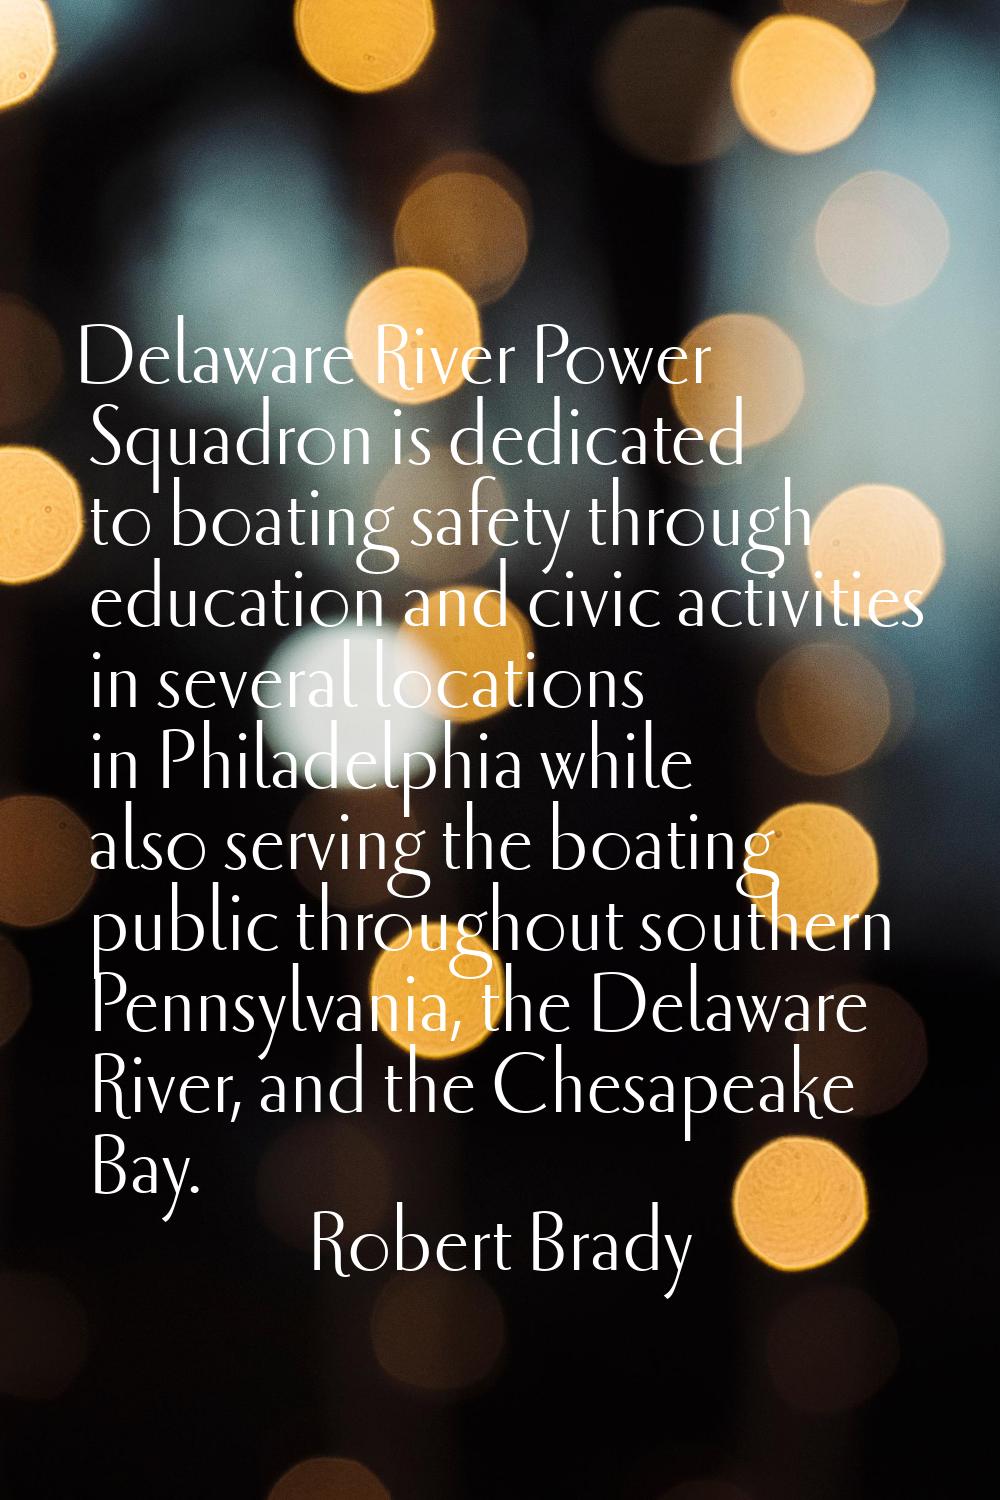 Delaware River Power Squadron is dedicated to boating safety through education and civic activities